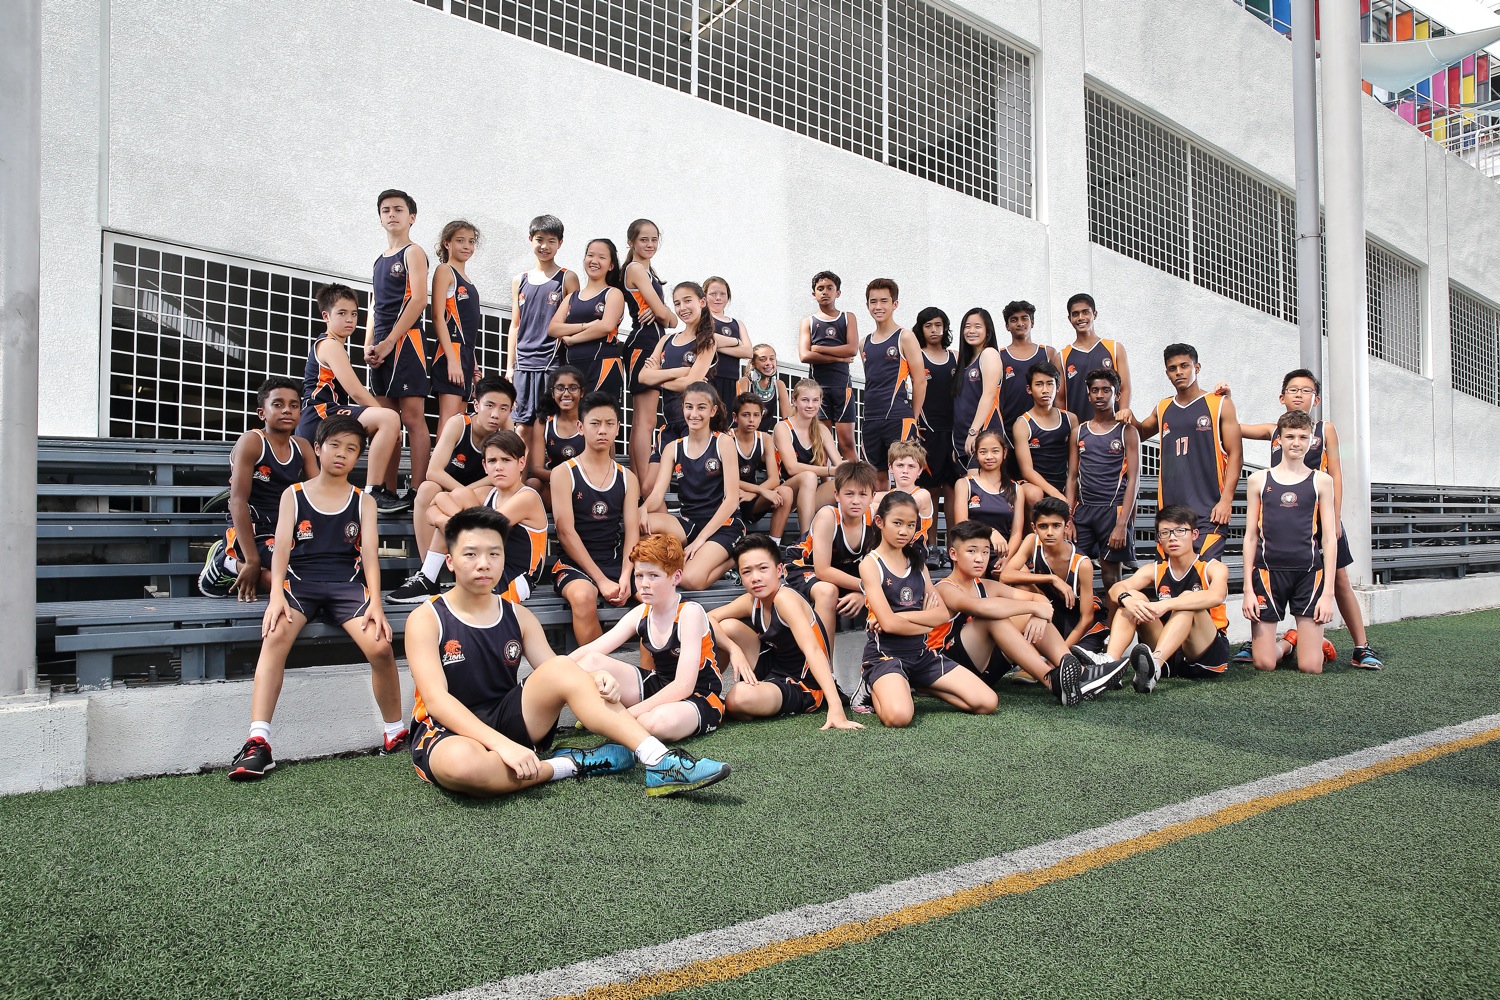 Cross country group photography of BSKL